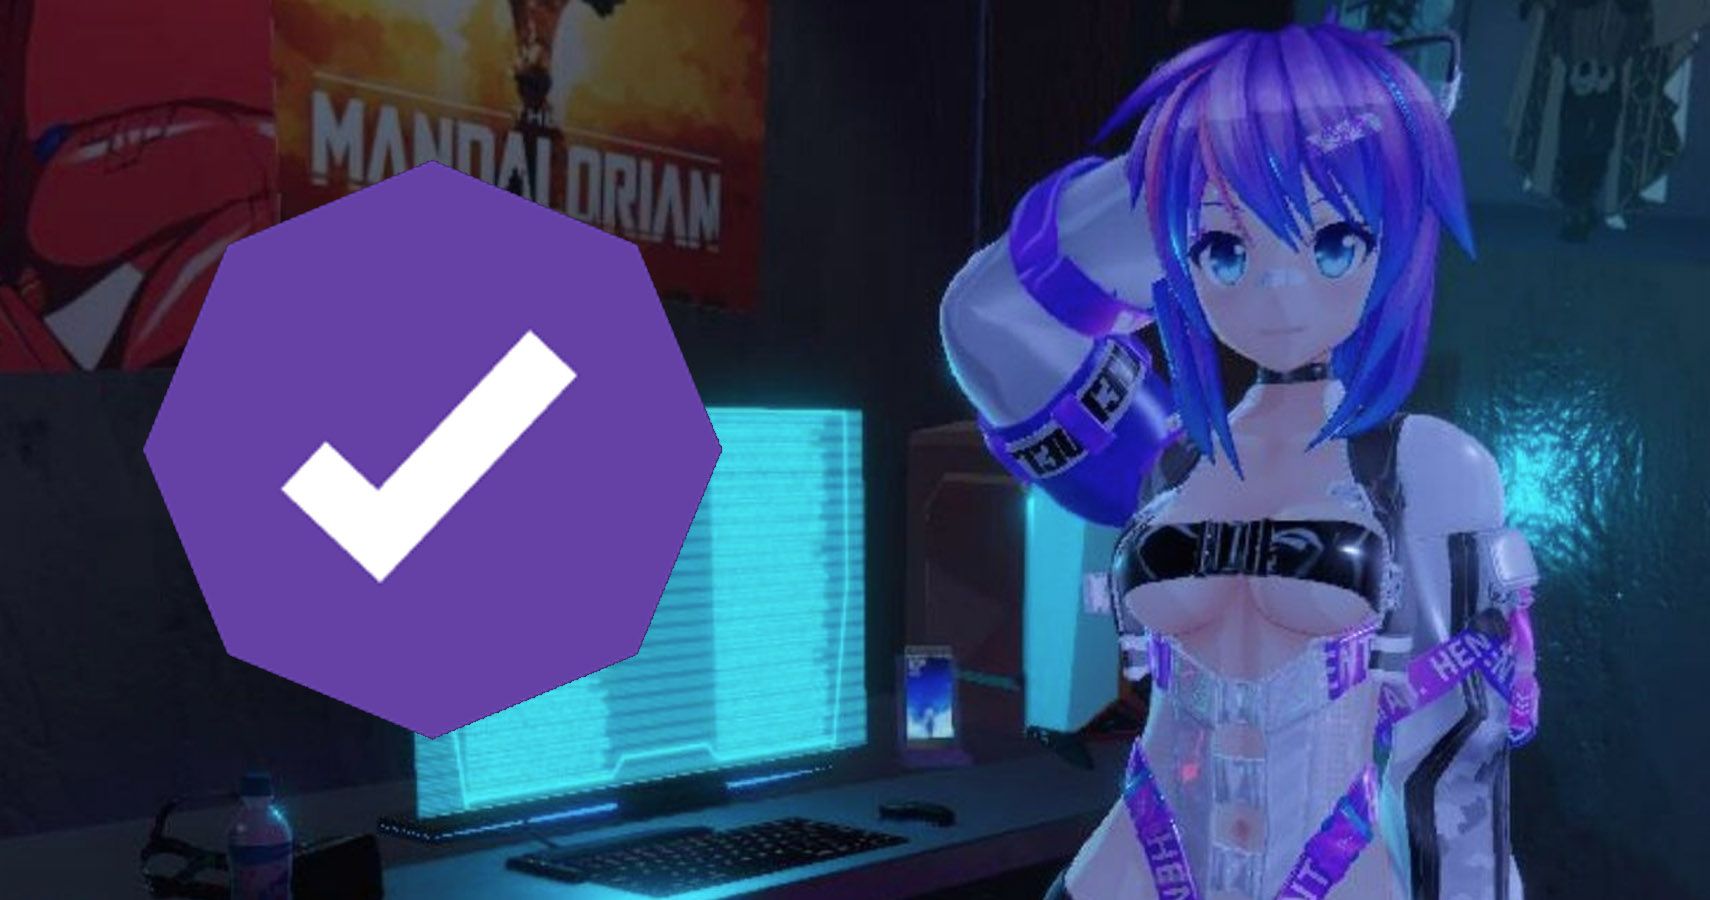 Twitch S Instant Partnering Of Projektmelody Proves They Only Support Sex That Sells